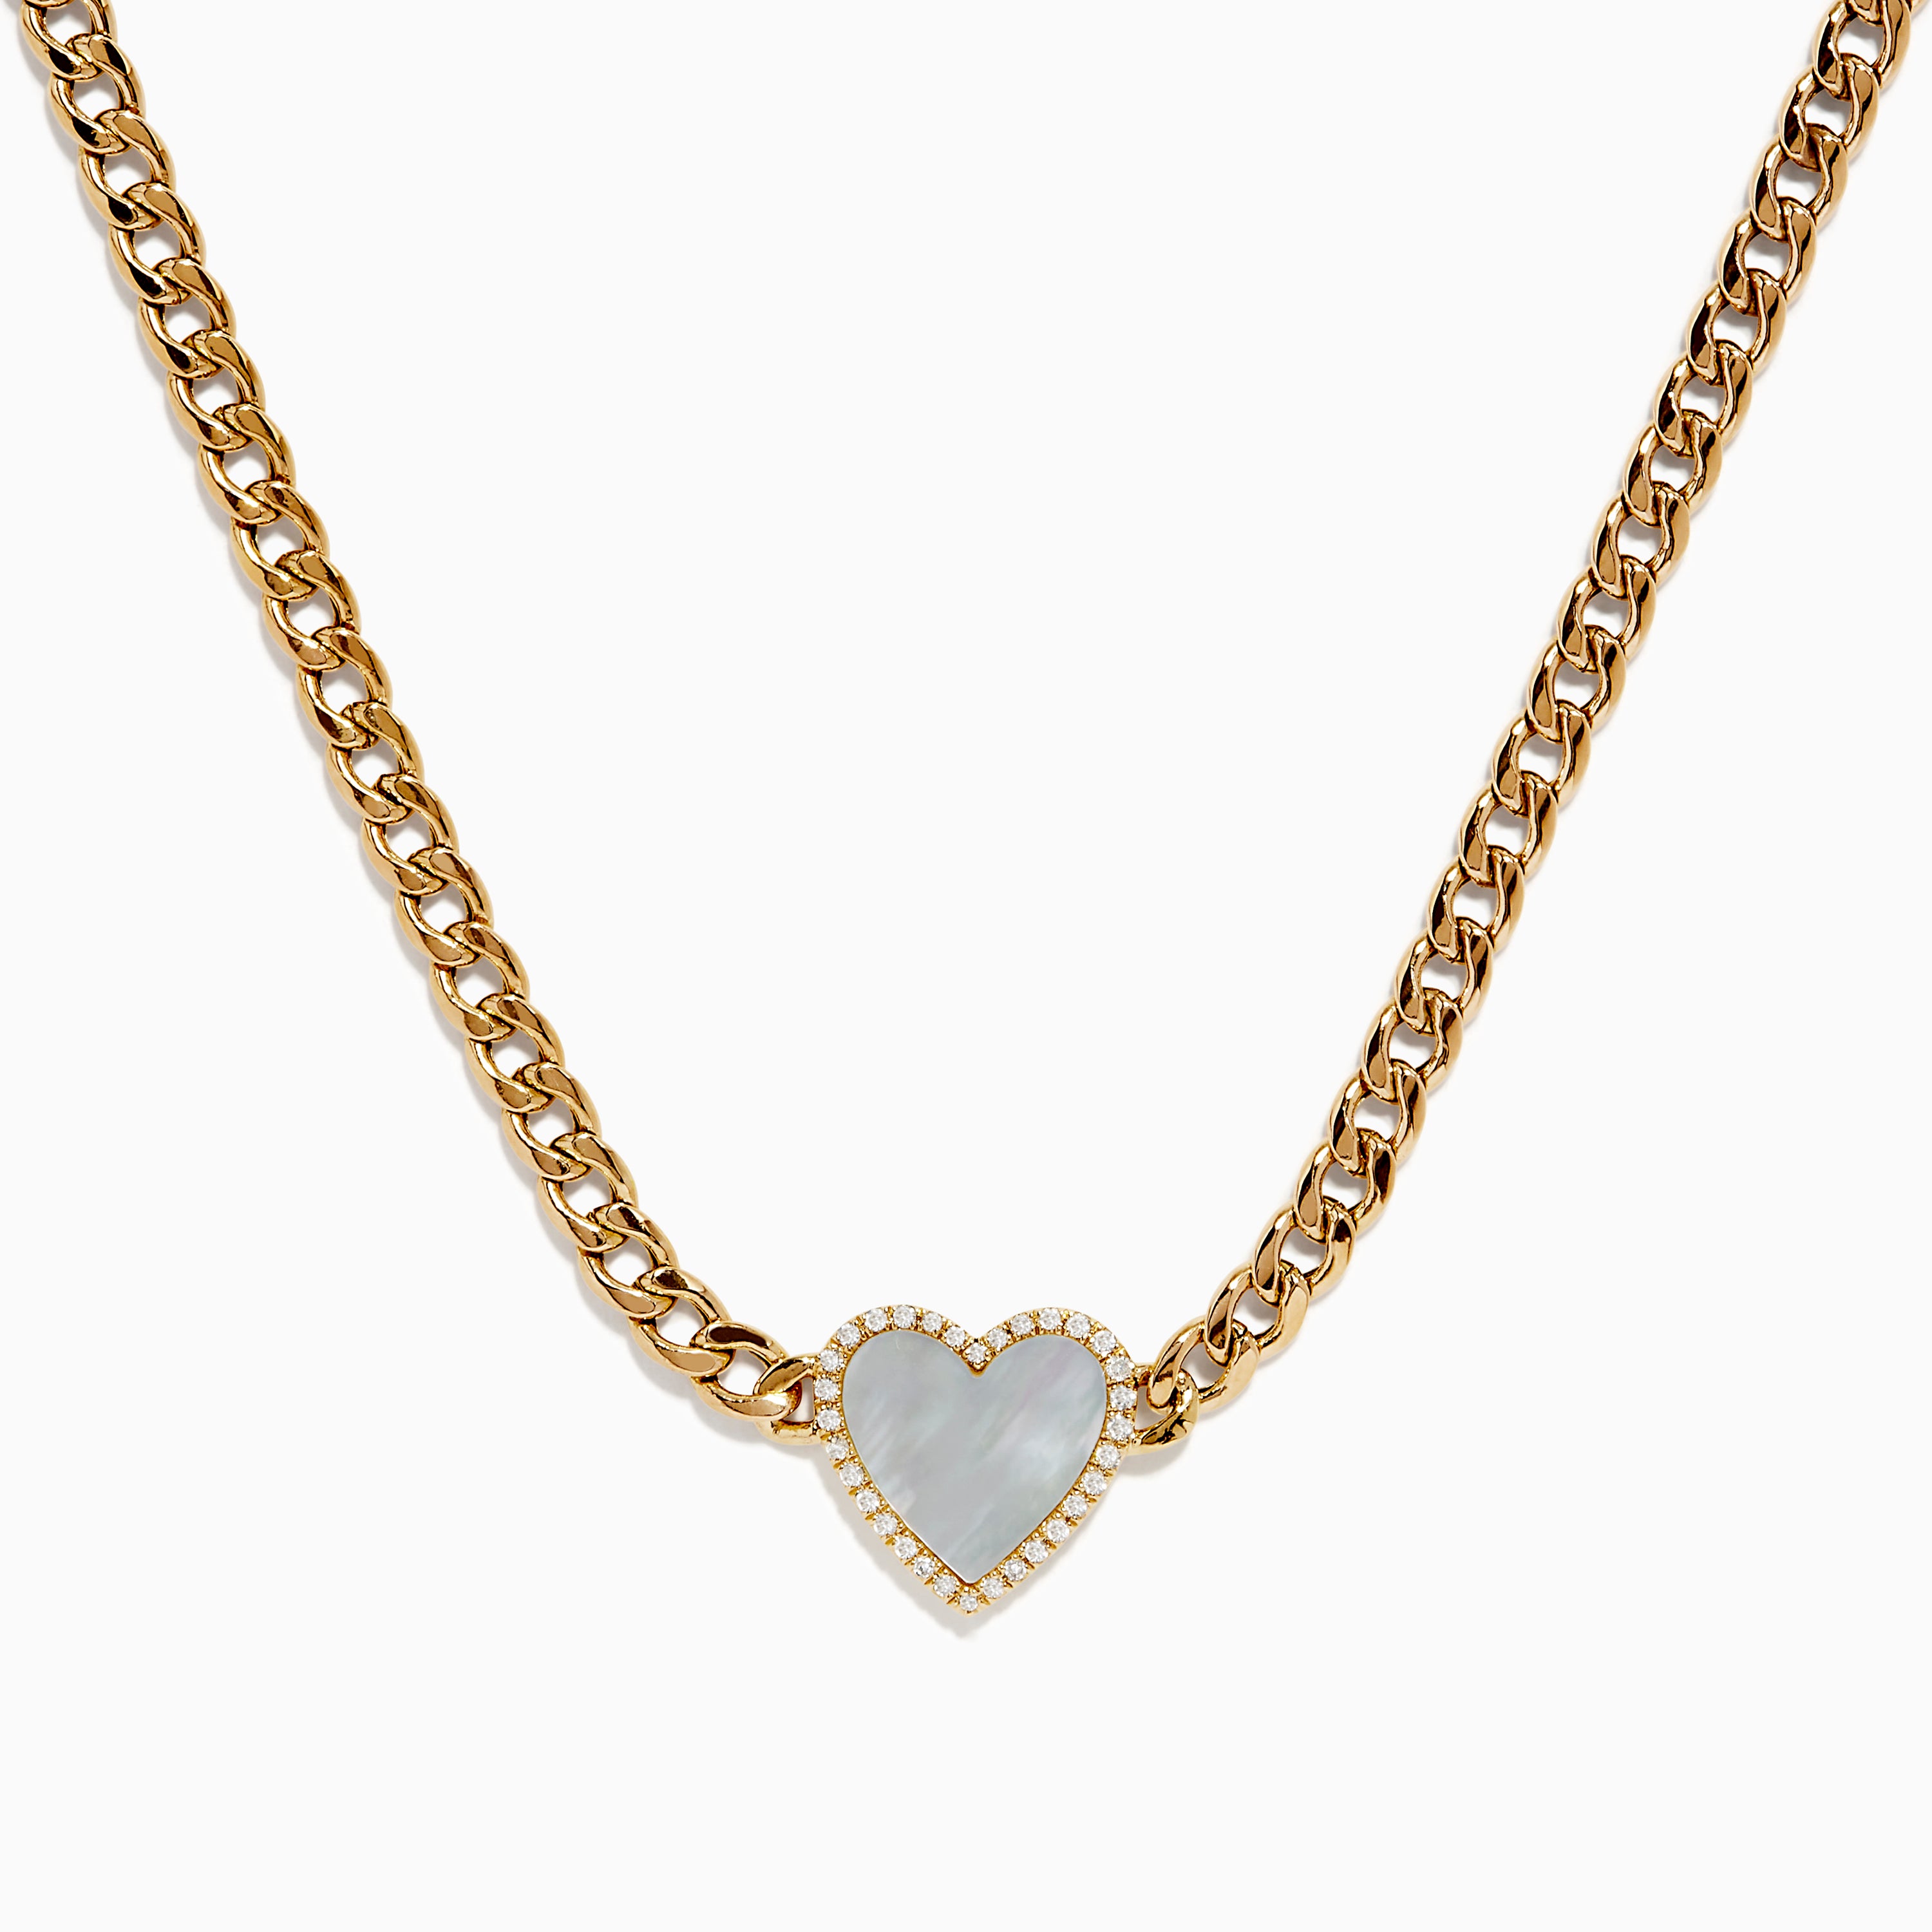 Effy Novelty 14K Yellow Gold Diamond and Mother of Pearl Heart Necklace